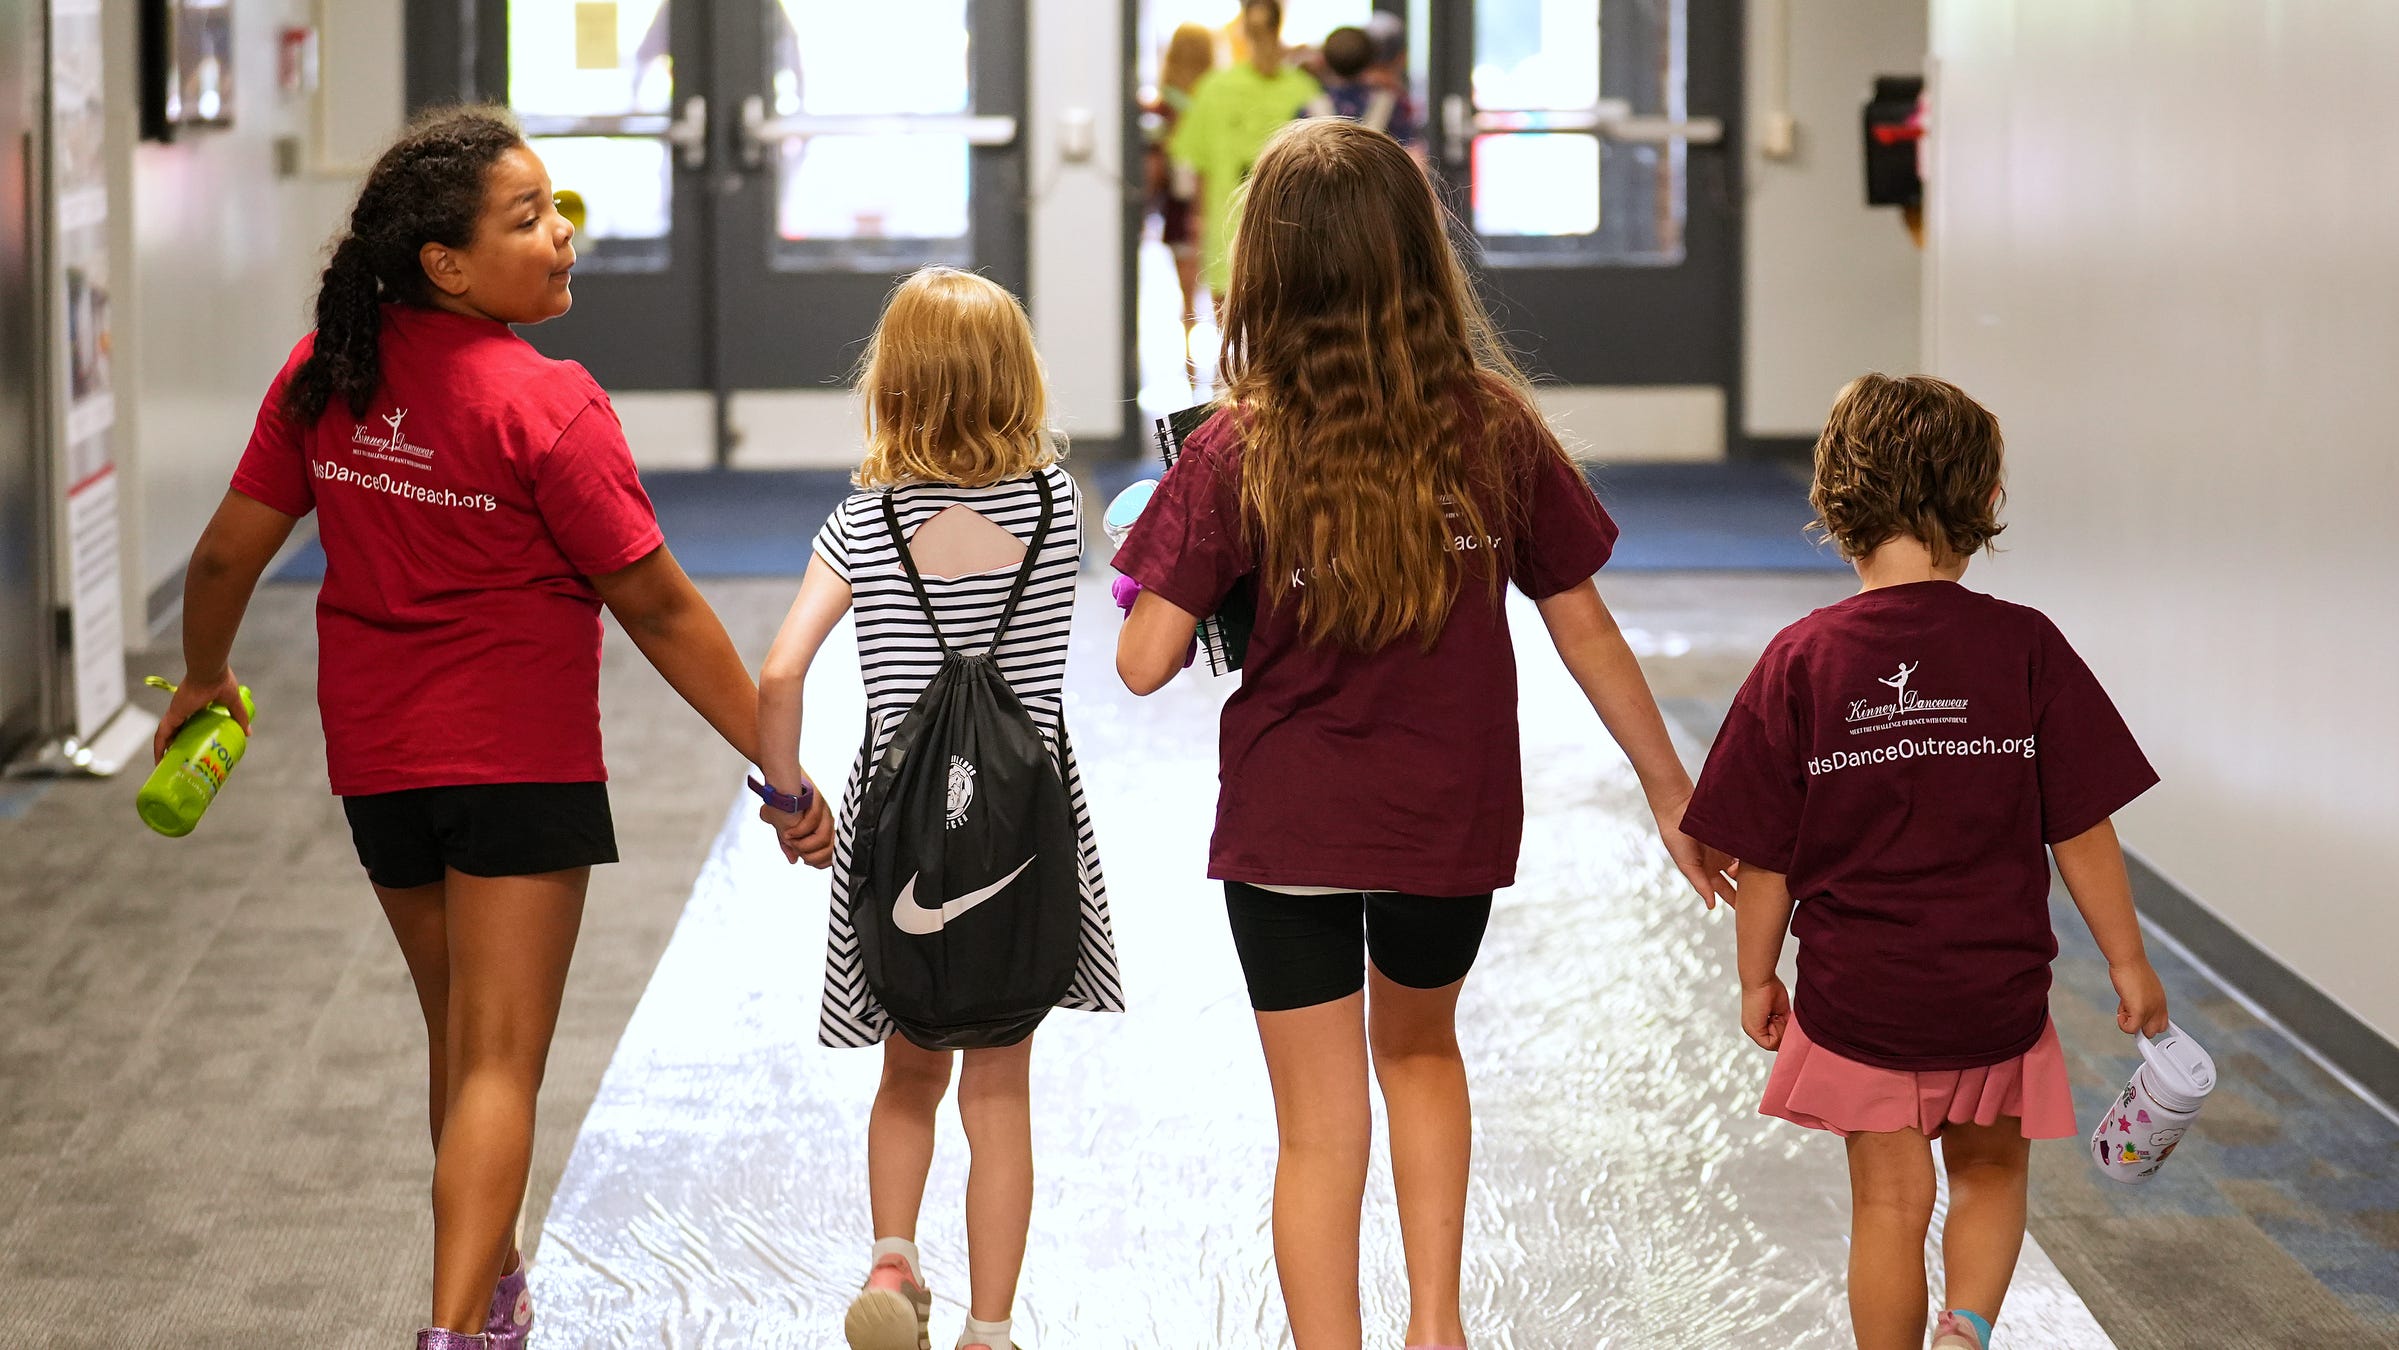 Students leave Resilience Camp on Tuesday, June 28, 2022, at Spring Mill Elementary School in Indianapolis. The summer program invites Washington Township students grades K-5 to participate in a week of activities centered on social and emotional learning. 